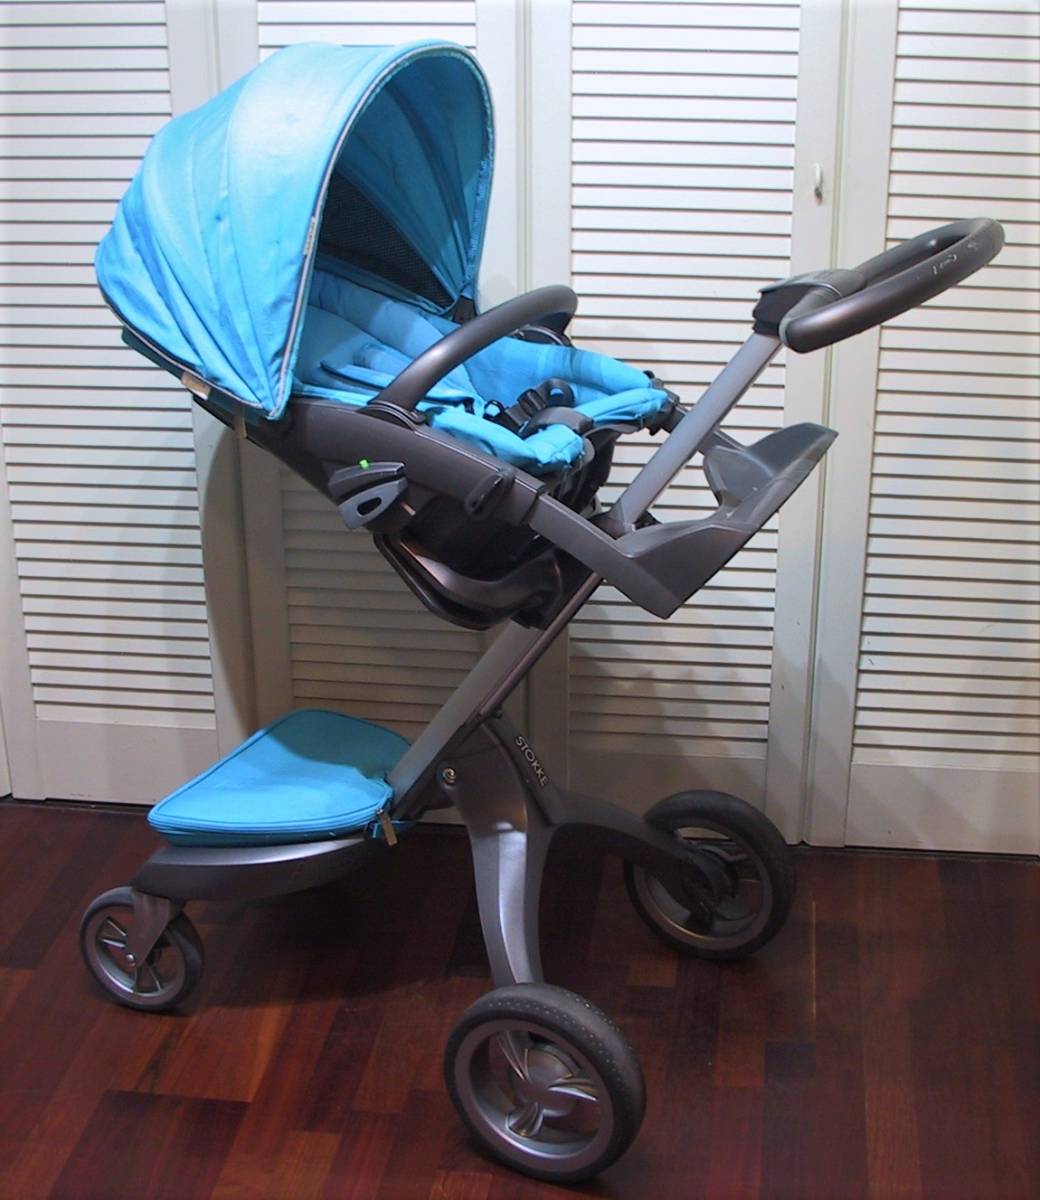  -stroke keeksp lorry /Stokke Xplory stroller / buggy 4 wheel against surface the back side newborn baby OK Carry cot attaching attached great number cleaning settled beautiful goods Northern Europe noru way 